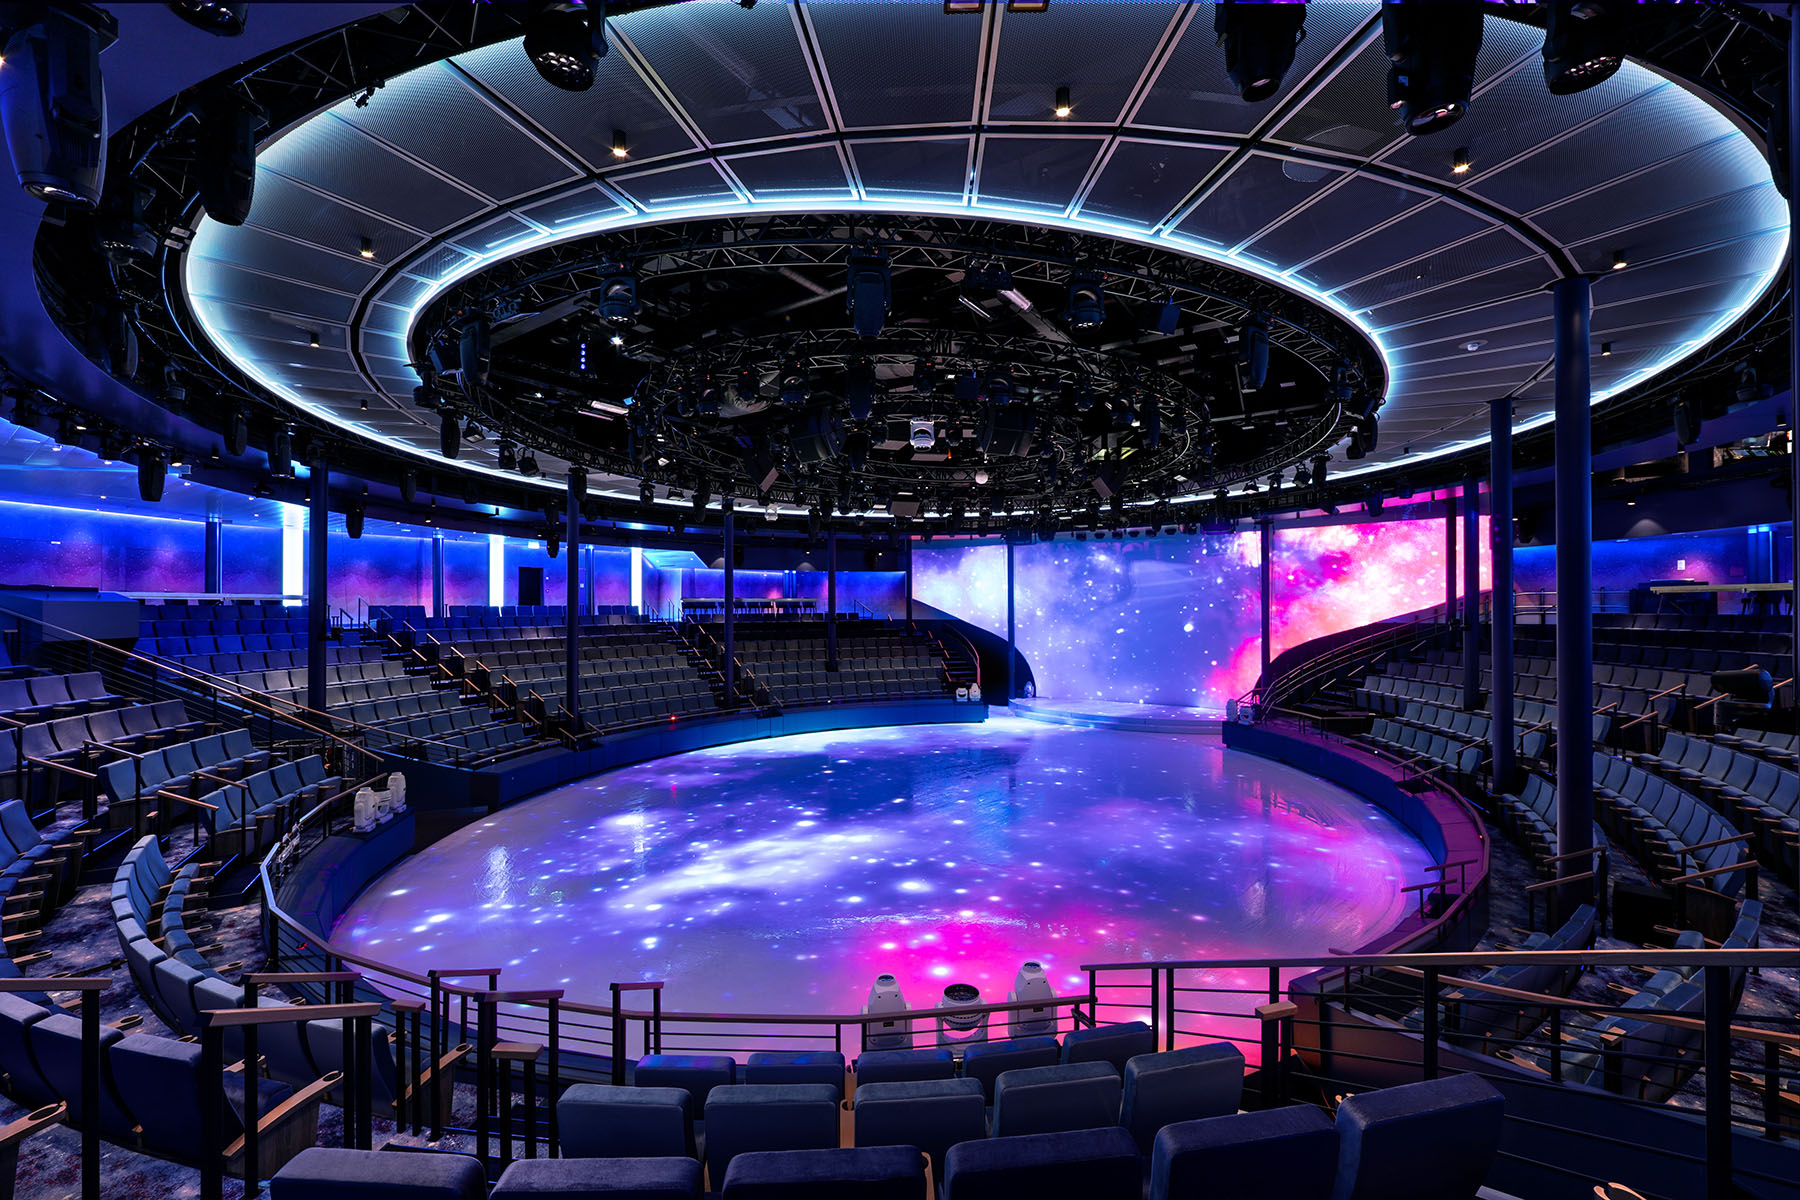 Absolute Zero on Royal Caribbean’s Icon of the Seas is the largest ice arena at sea, used for both leisure and shows.